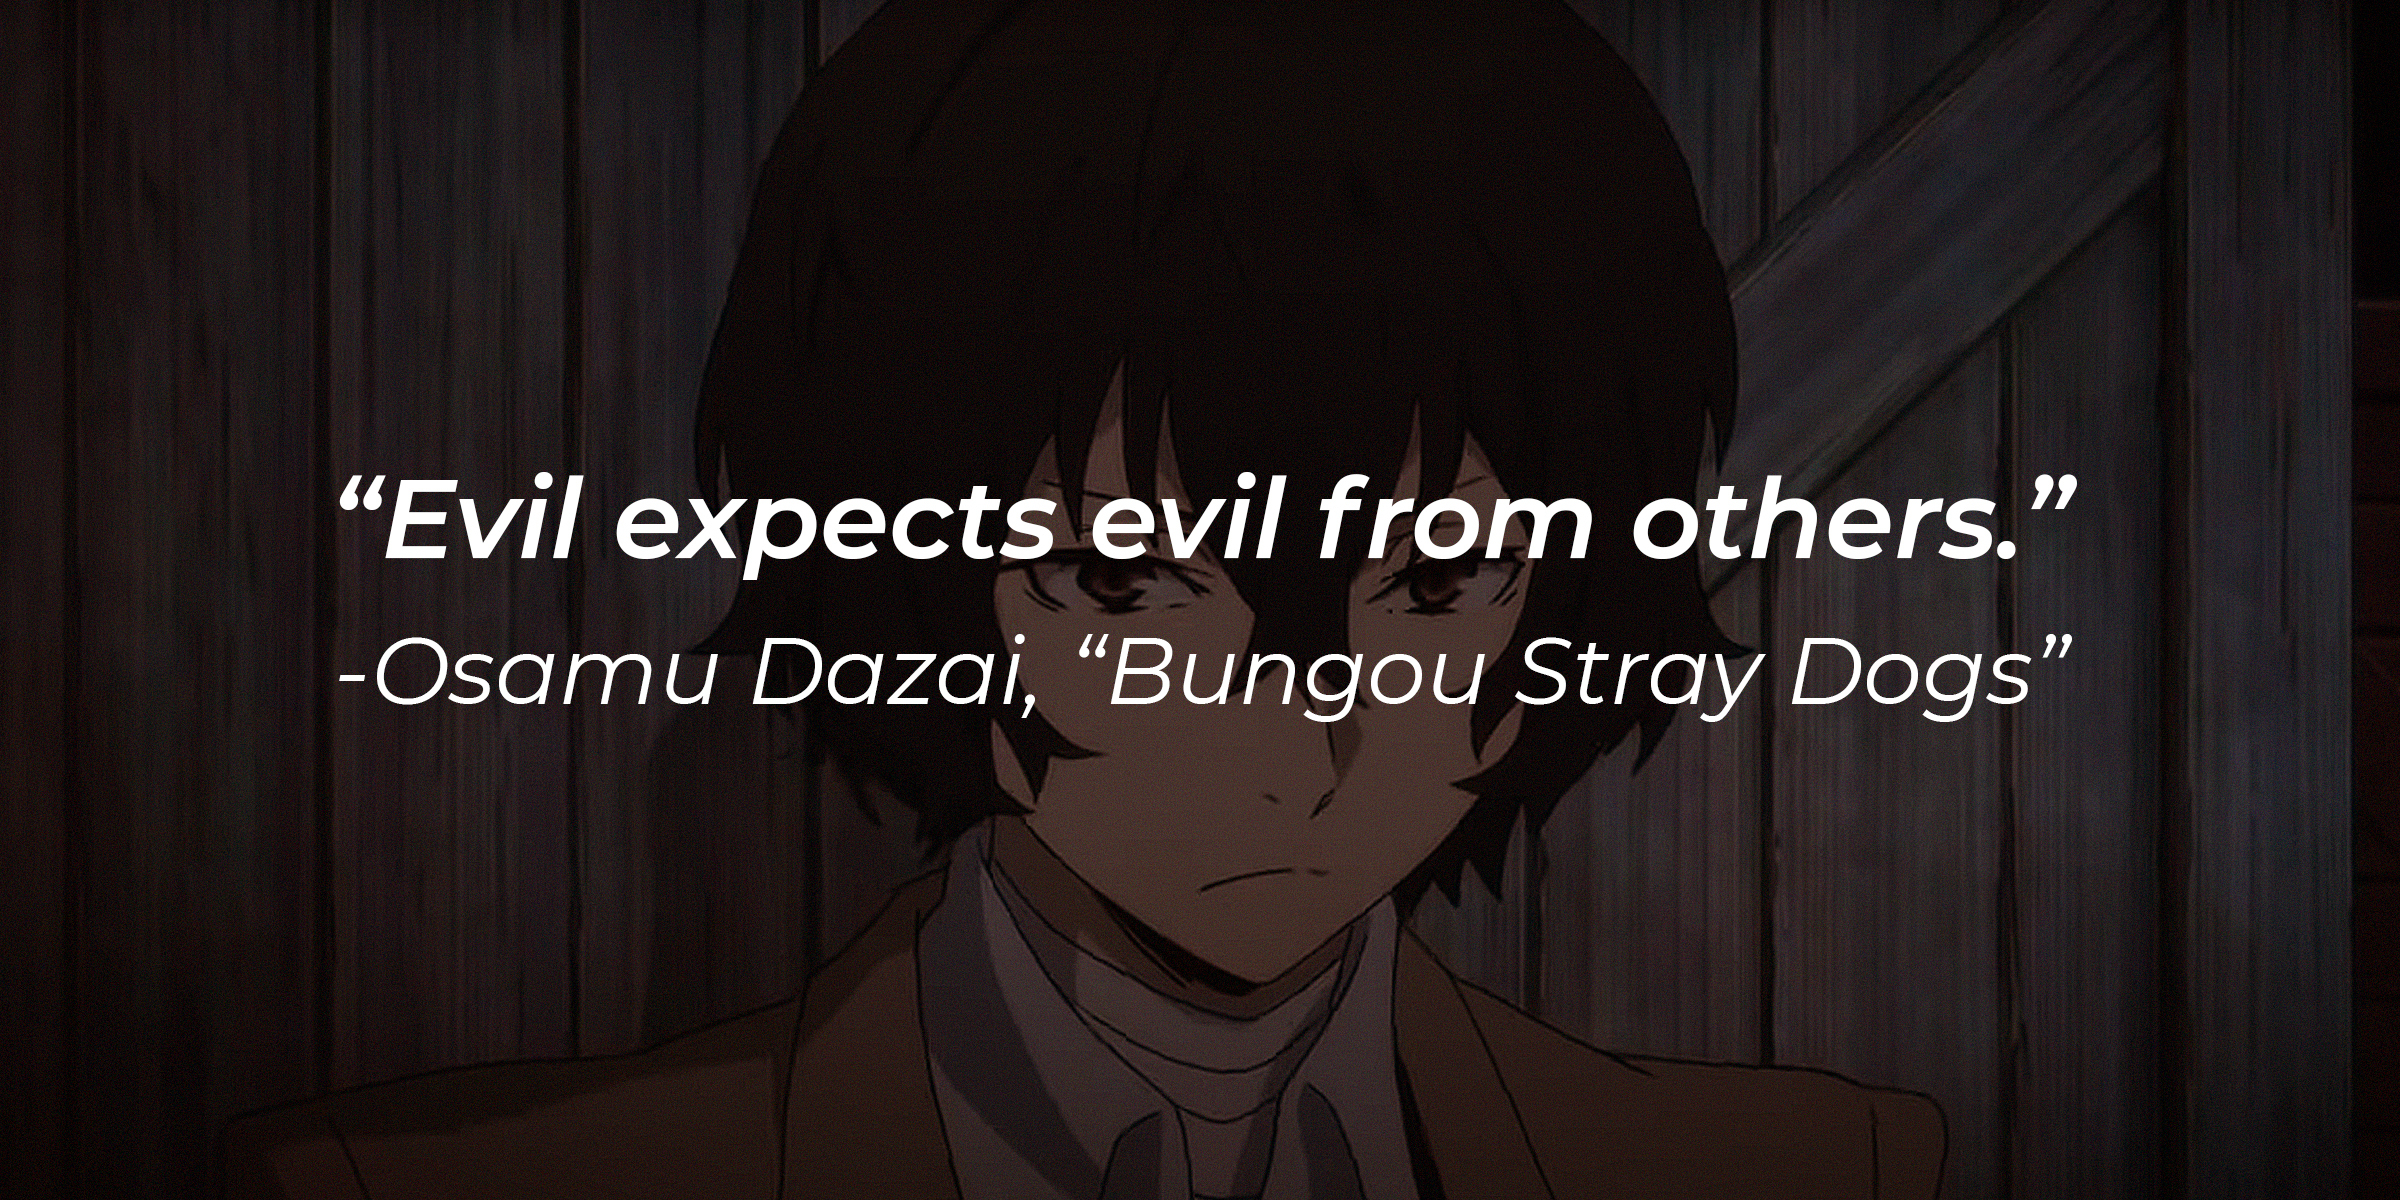 Osamu Dazai's quote: "Evil expects evil from others.” | Image: youtube.com/Crunchyroll Collection